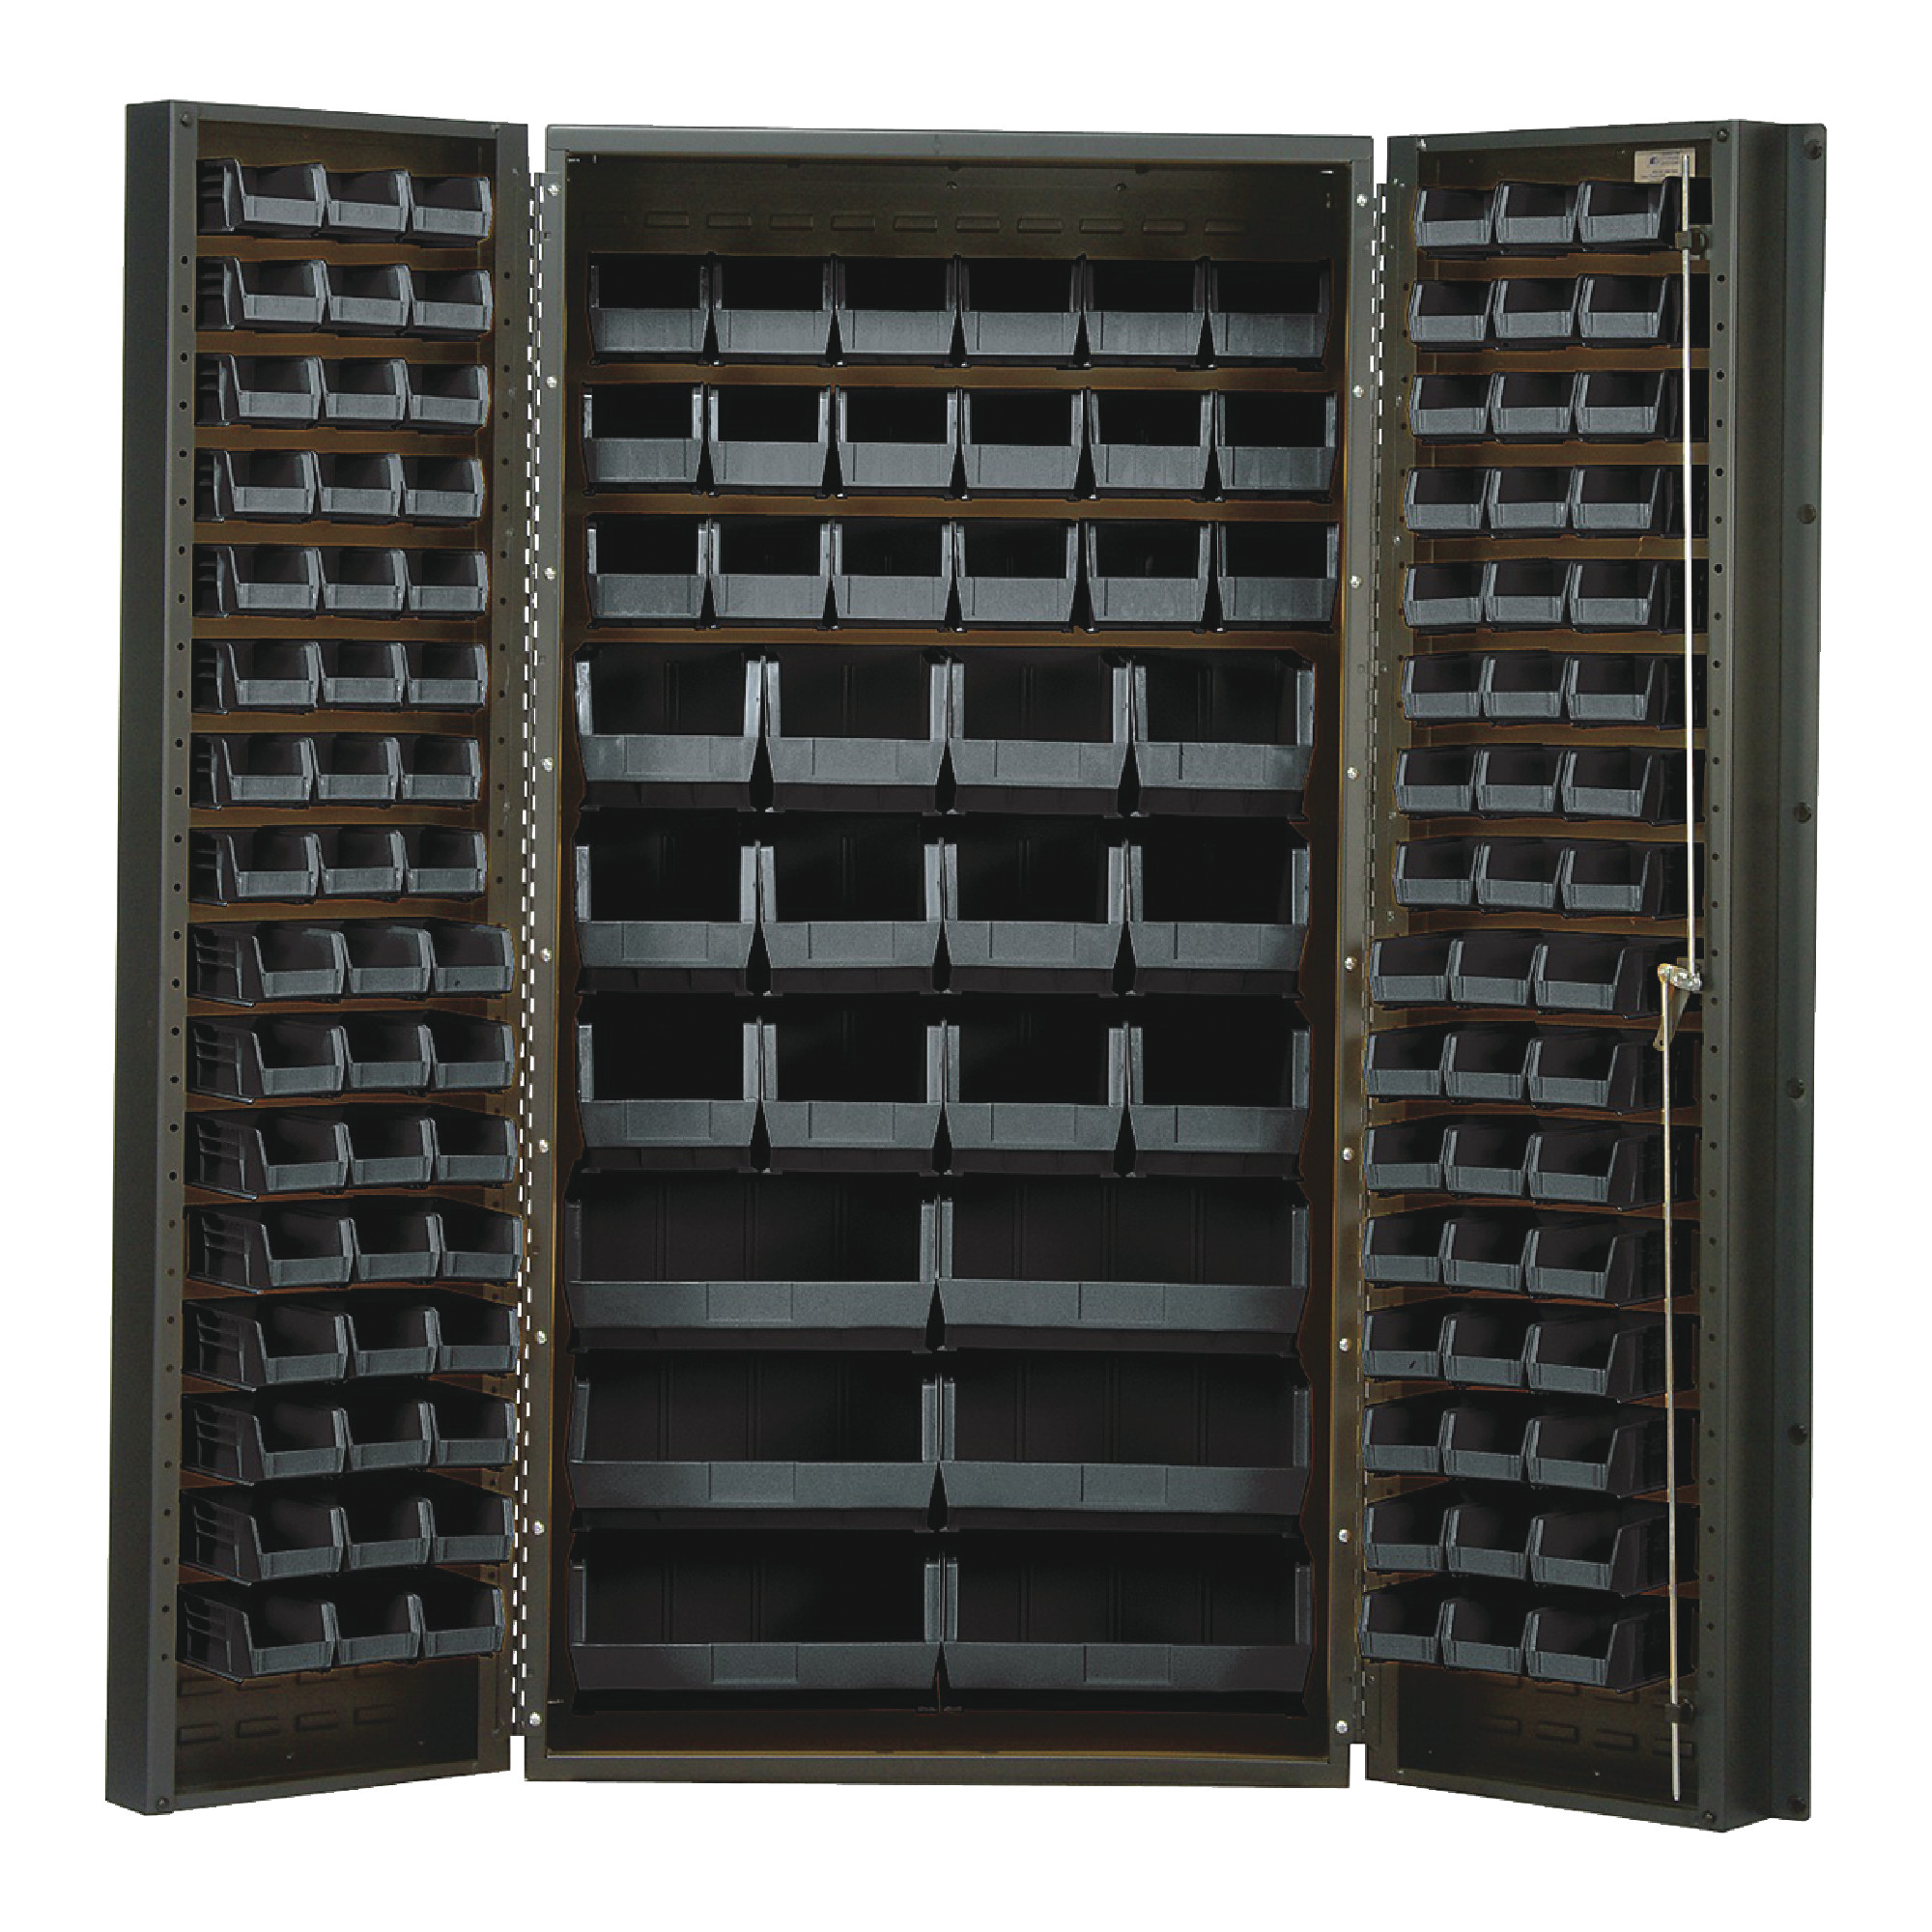 QUANTUM STORAGE SYSTEMS 36" Wide All Welded Floor Cabinet With 132 Black Bins